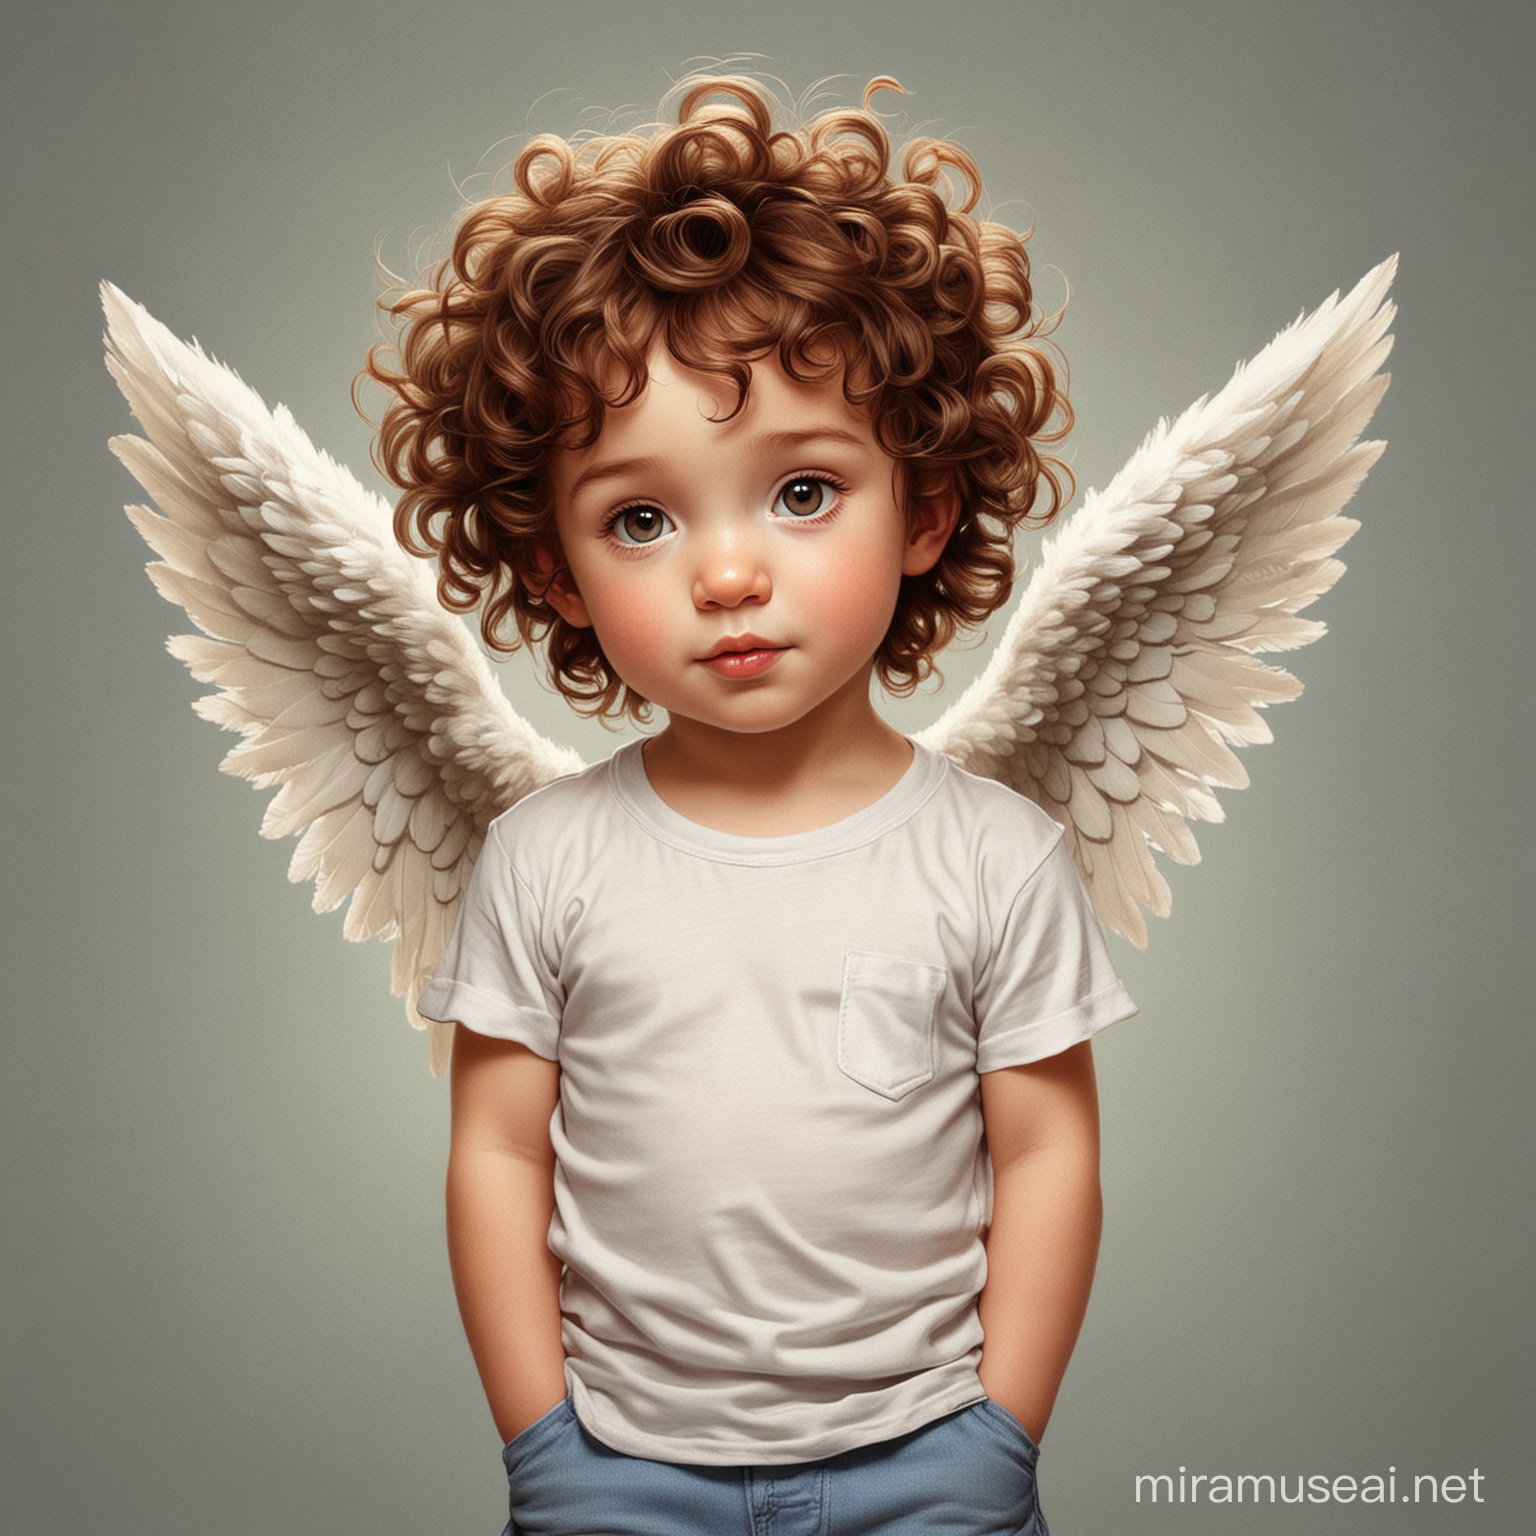 Adorable BrownHaired Cherub in Casual Tee Shirt